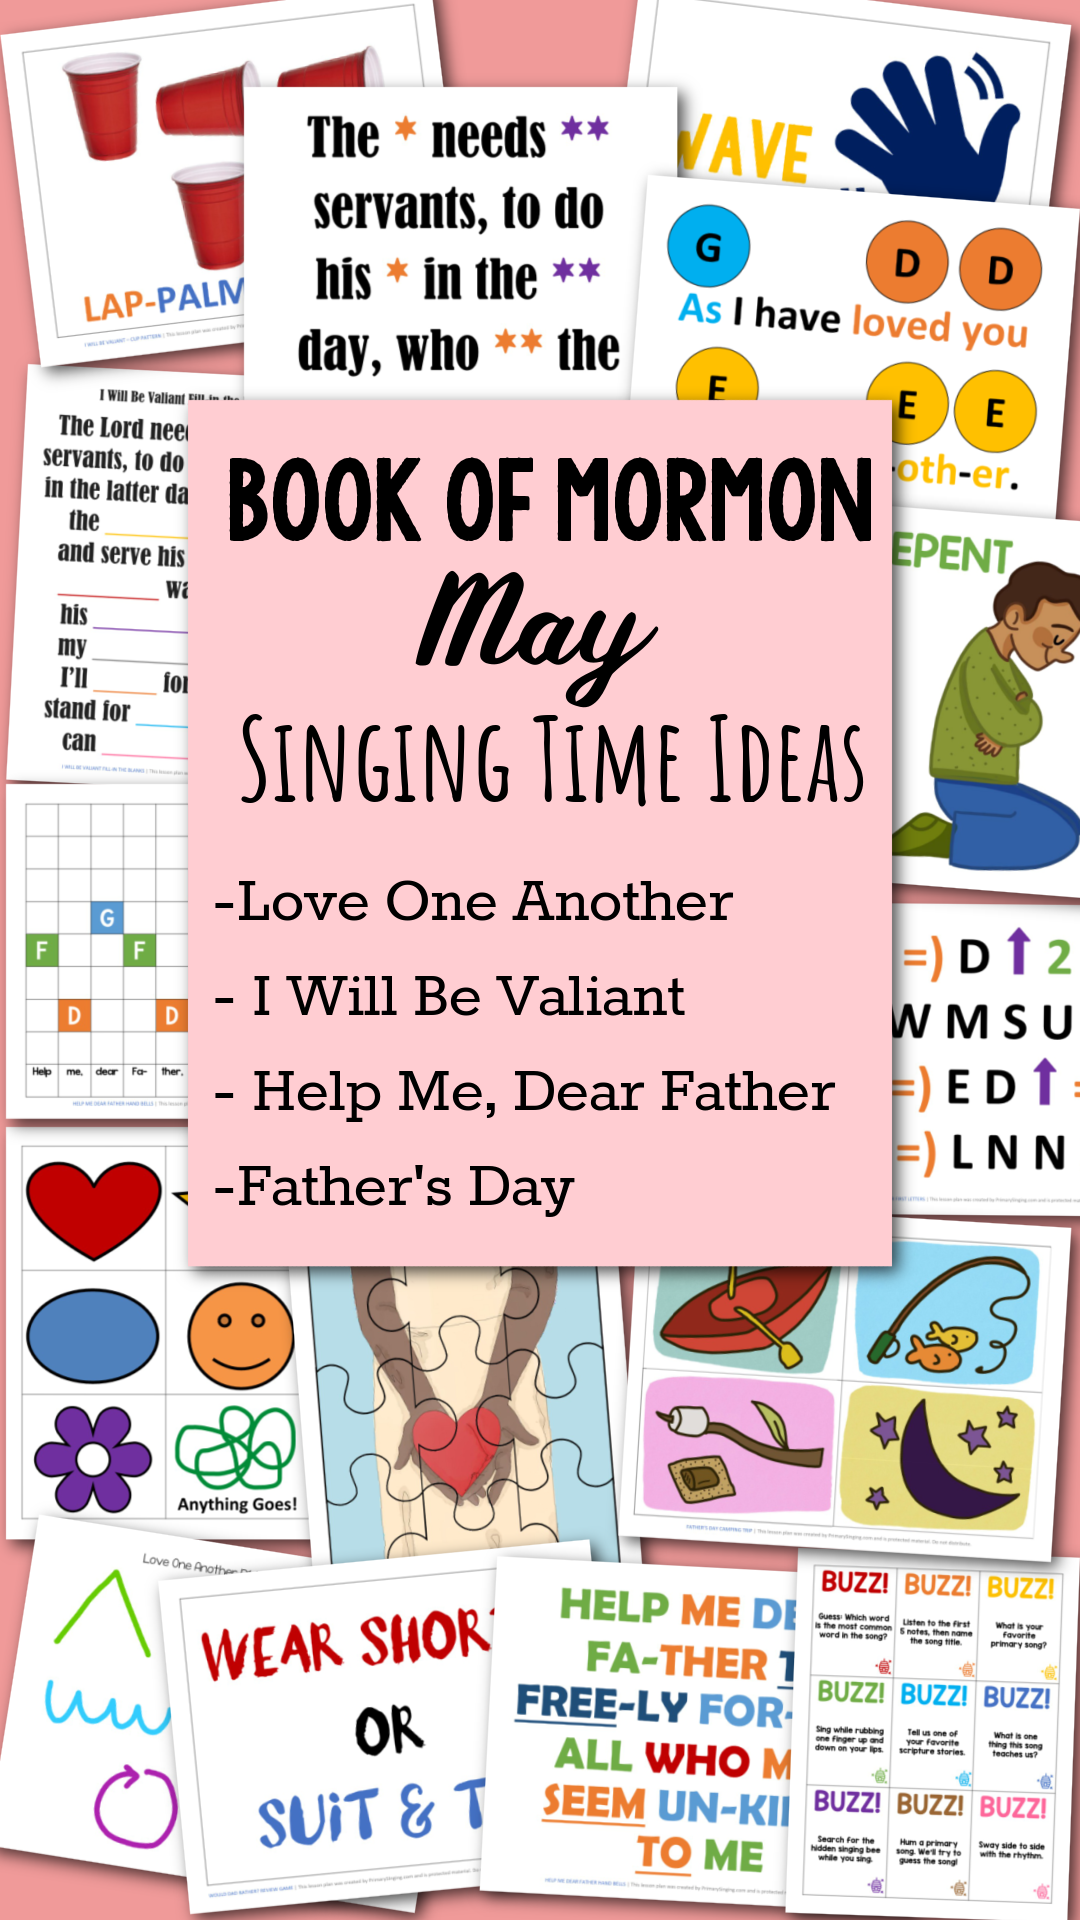 Book of Mormon May Primary Songs Singing Time Ideas for Love One Another, I Will Be Valiant and Help Me Dear Father with printable lesson plans and helps for all of these song choices plus Father's Day ideas! Packet for LDS Primary music leaders and families for Come Follow Me.